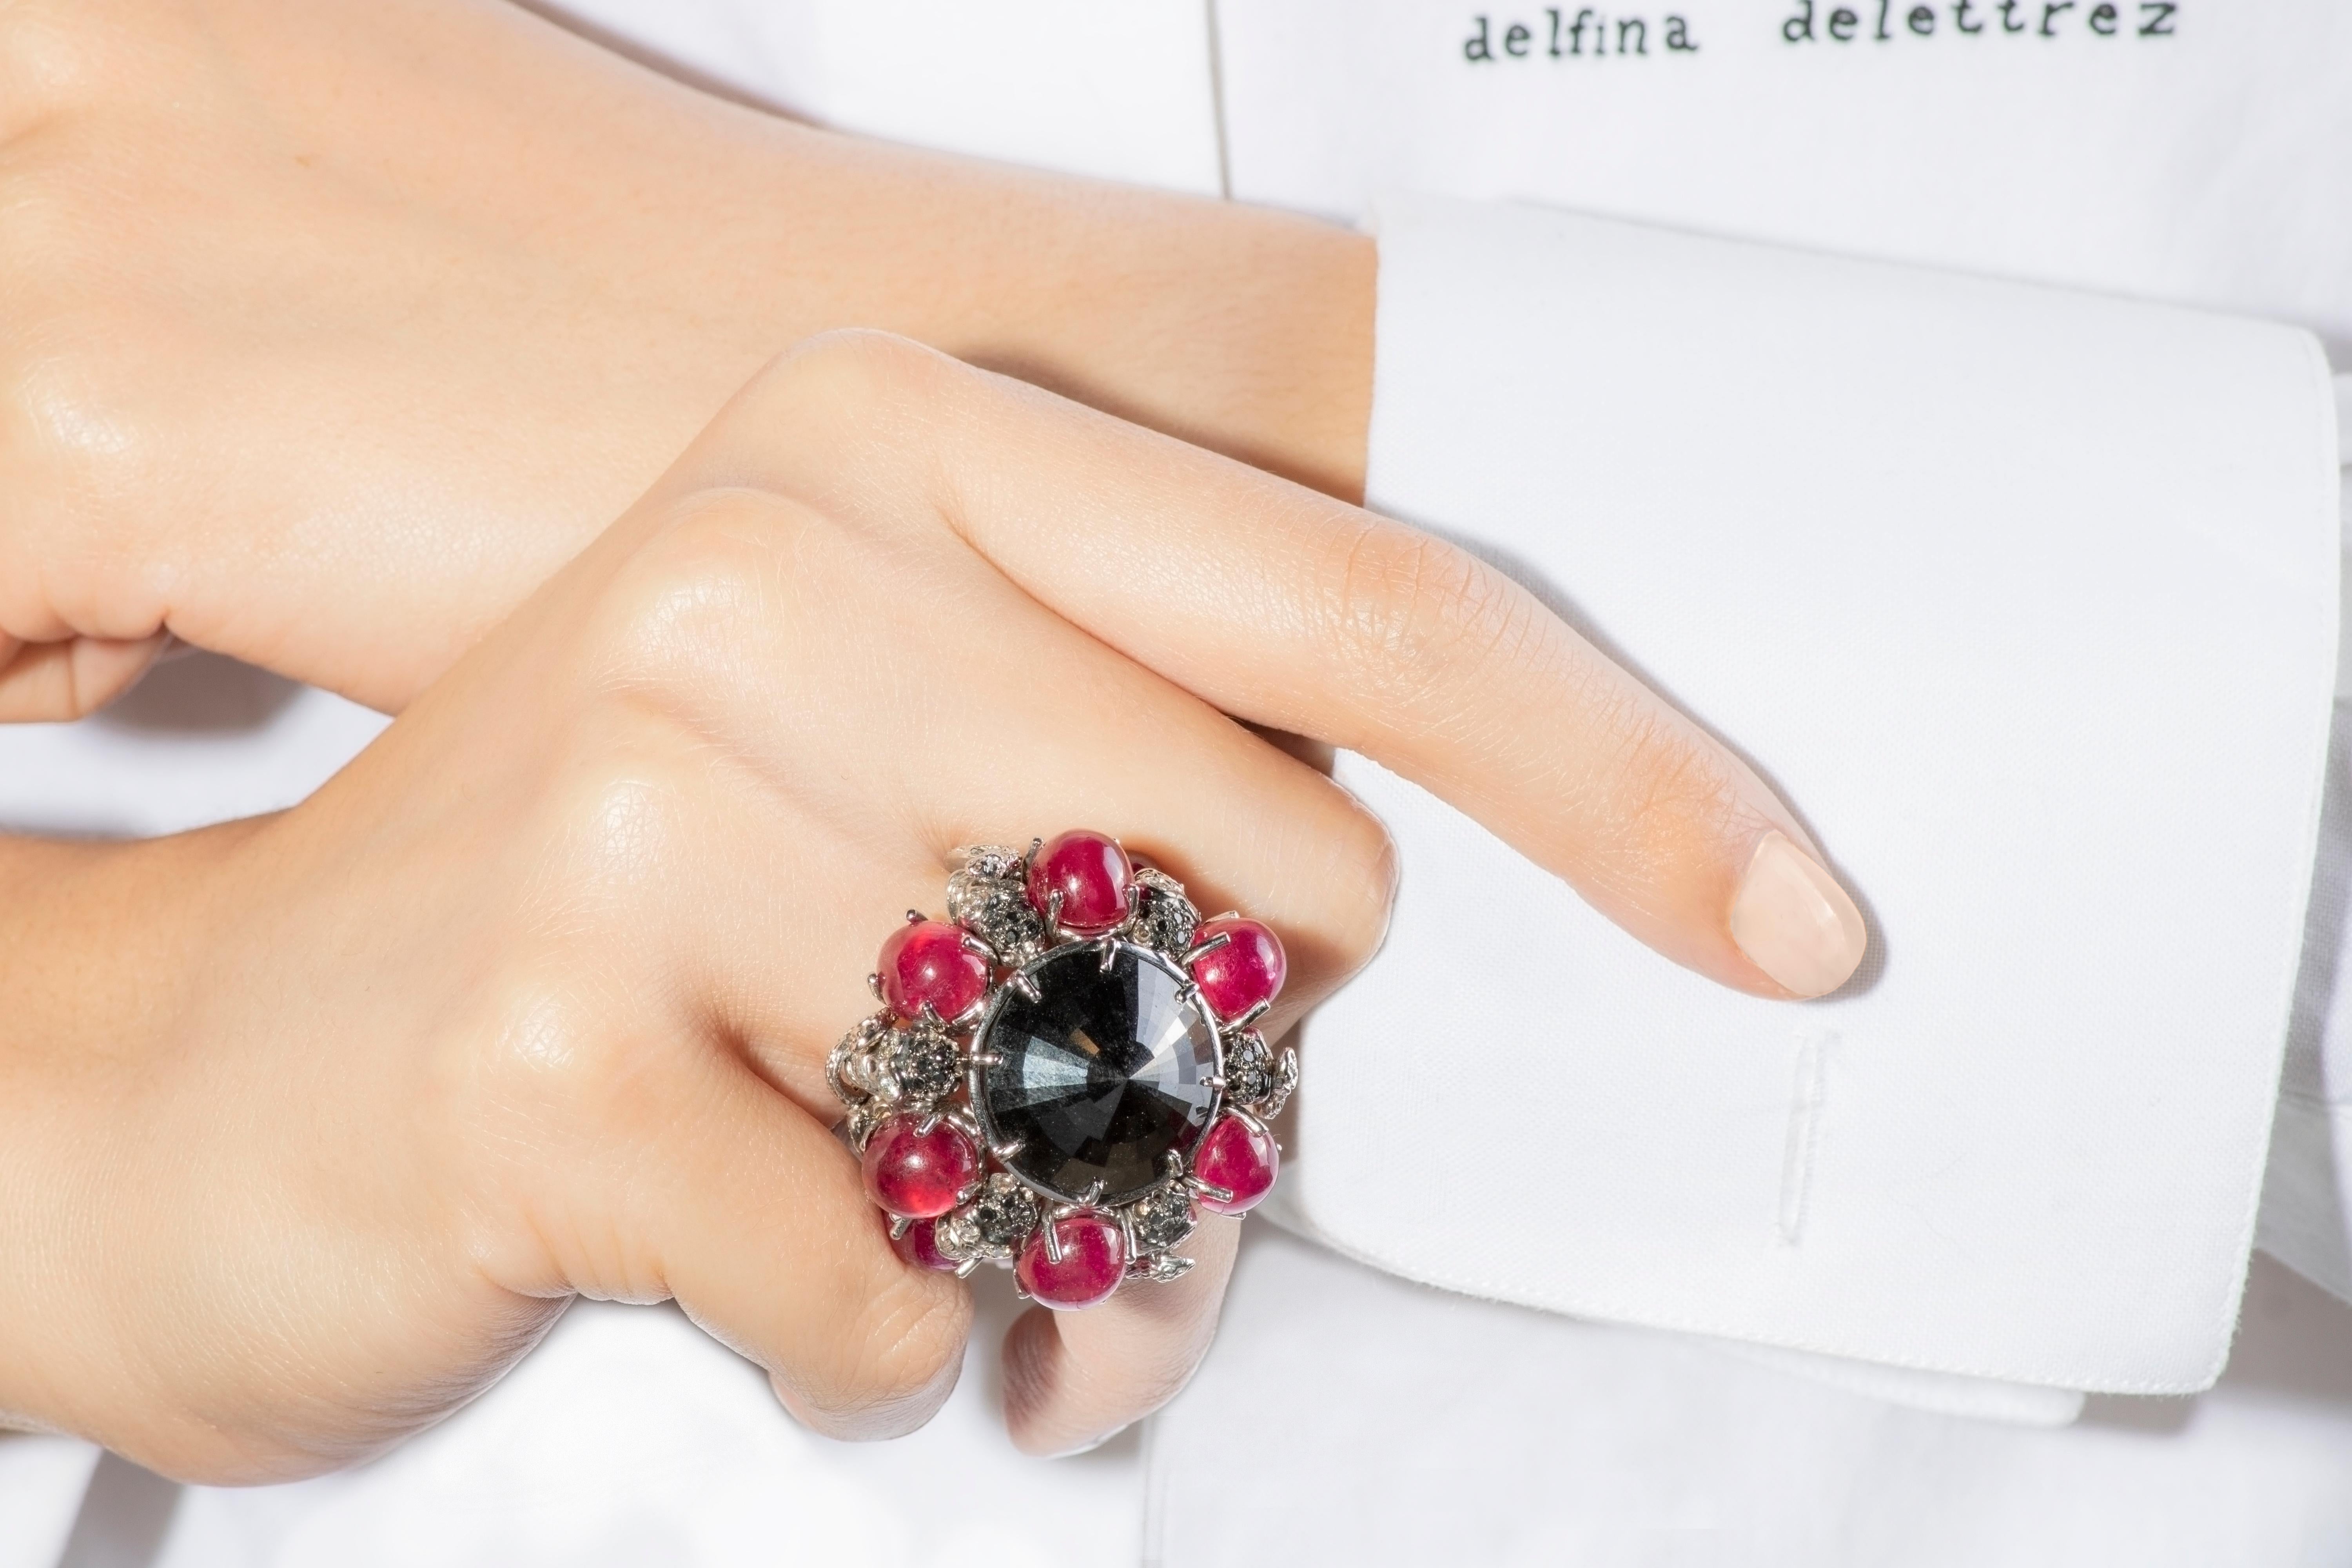 This unique ring by italian jeweller Delfina Delettrez stands out for its large black diamond 23,00 ct and its design ispired by victorian era. It is handcrafted from 30 gr gold and embellished with 8 rubies cabochon 35,87 ct placed around the